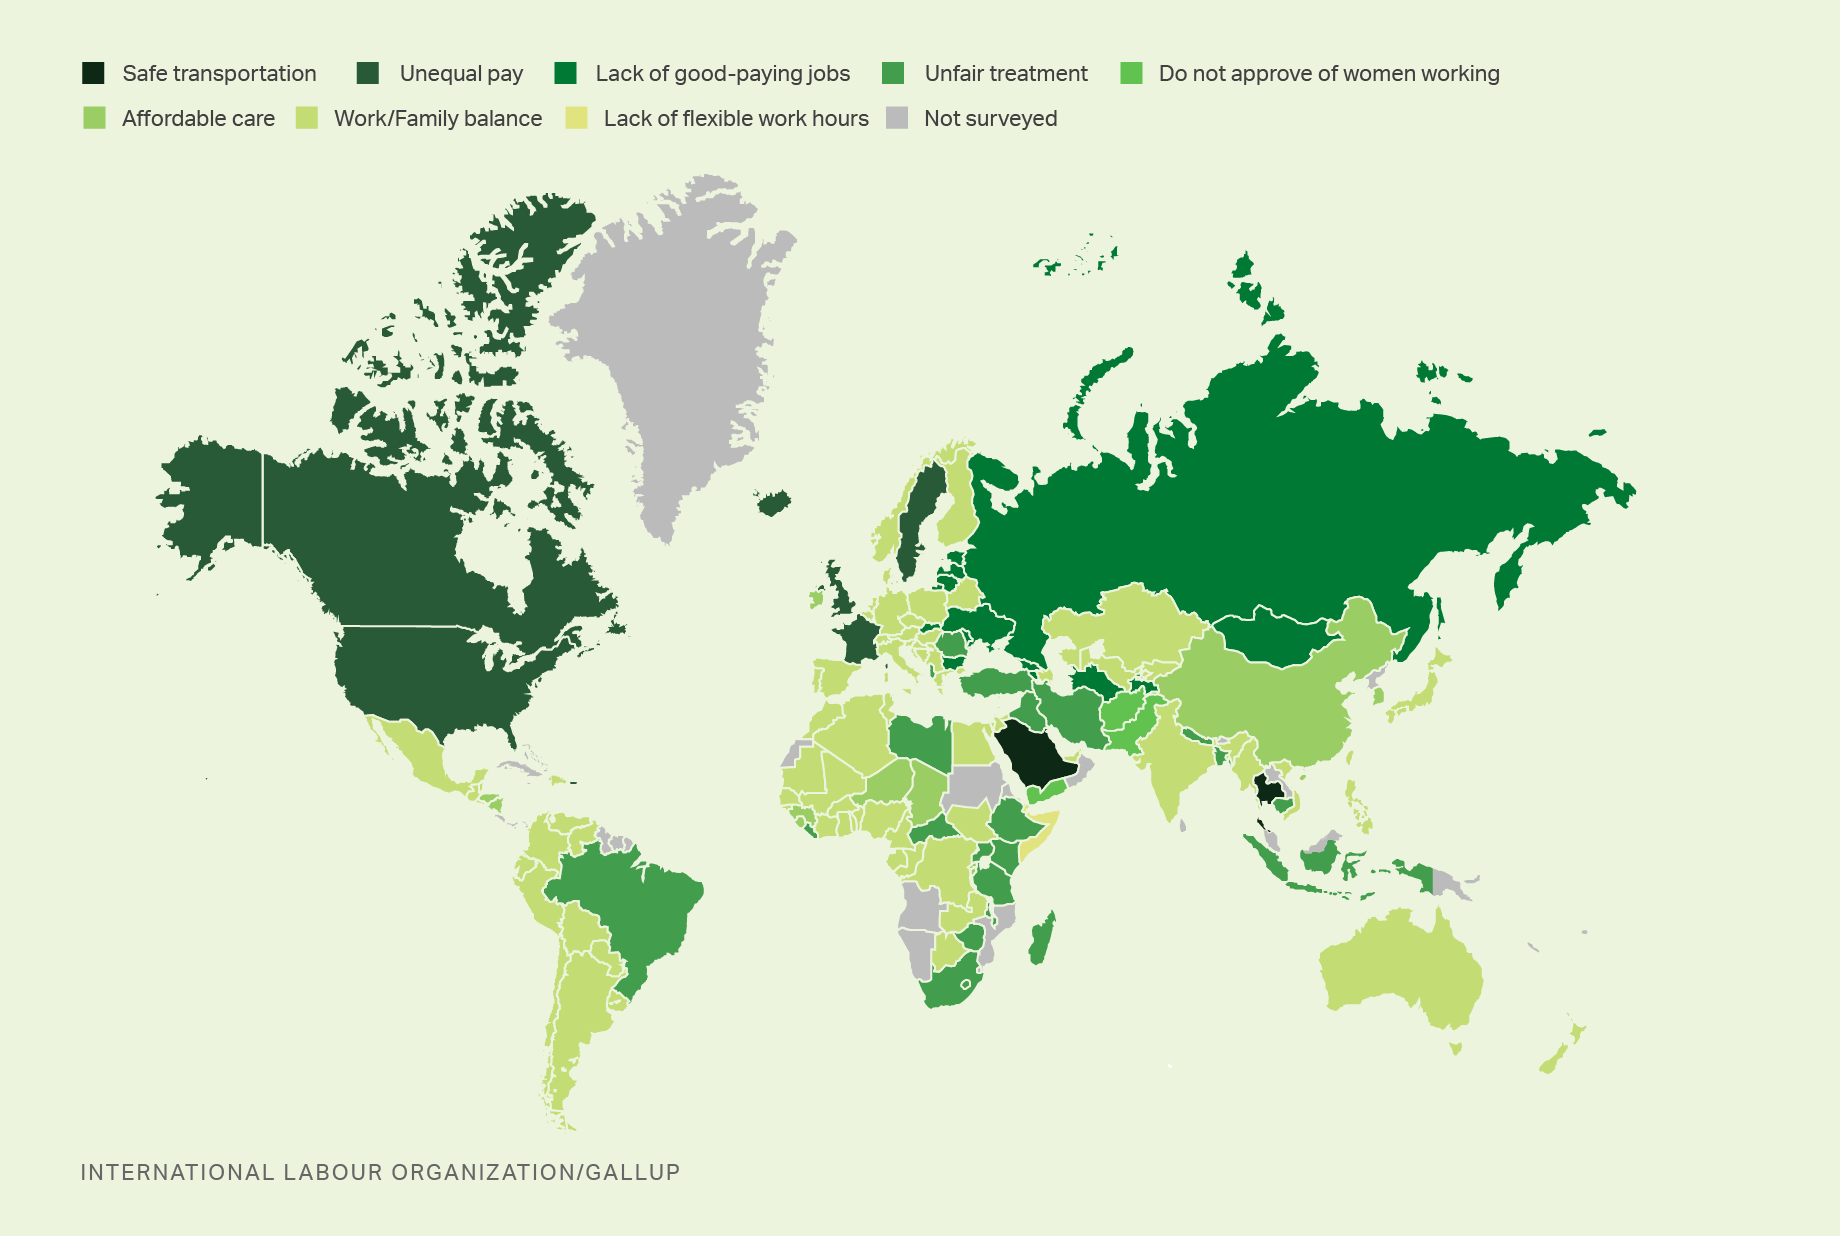 Primary challenges for women by country on world map from International Labour Organization and Gallup